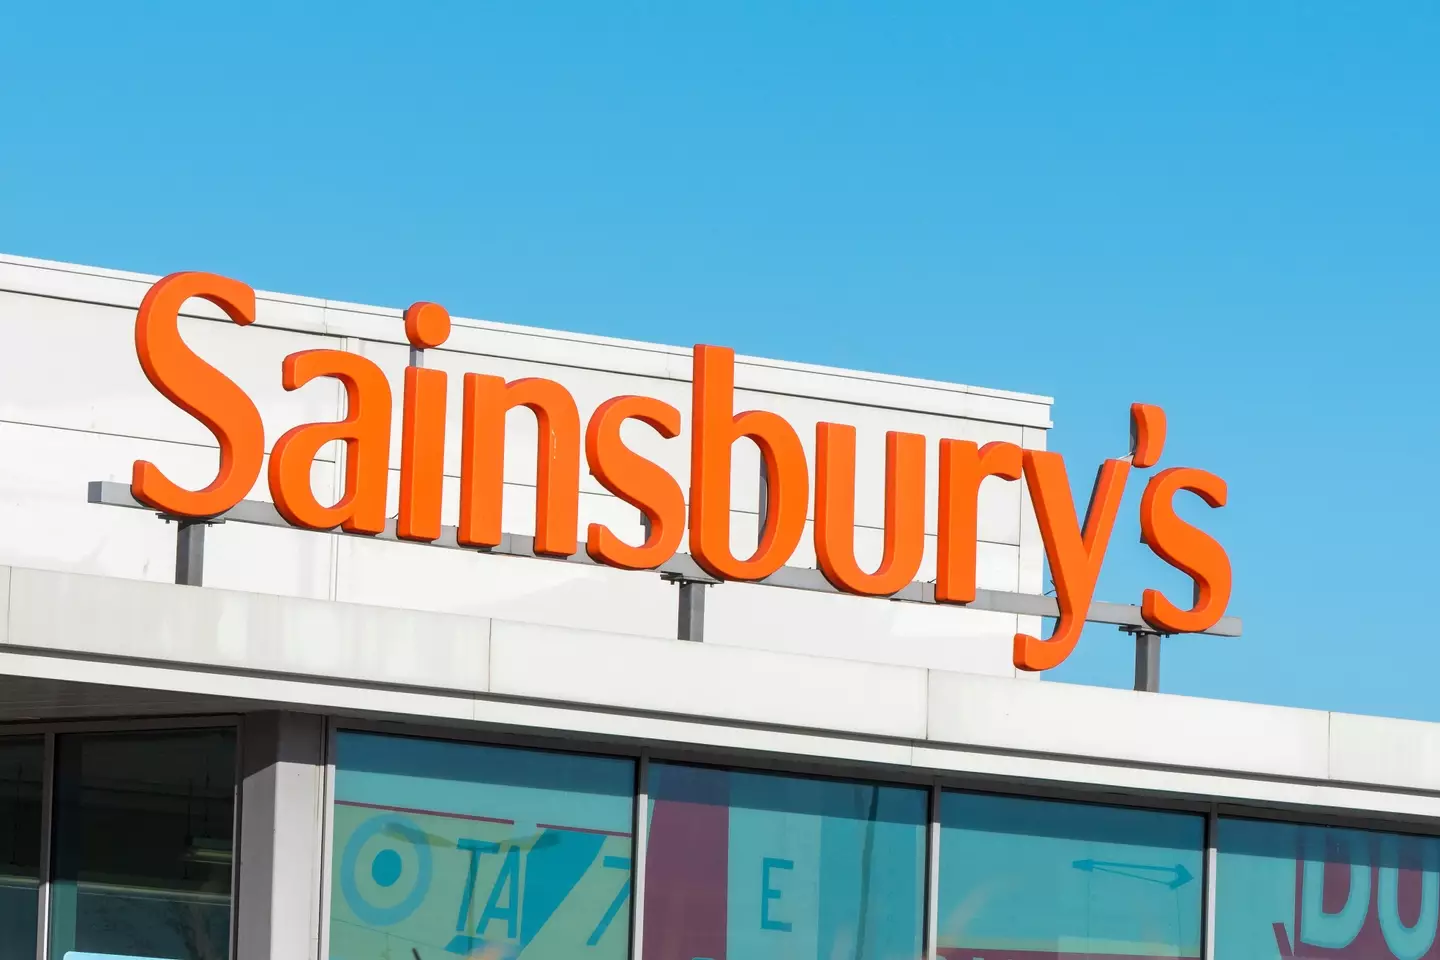 Sainsbury's say the security measure is in a 'small number' of their stores.